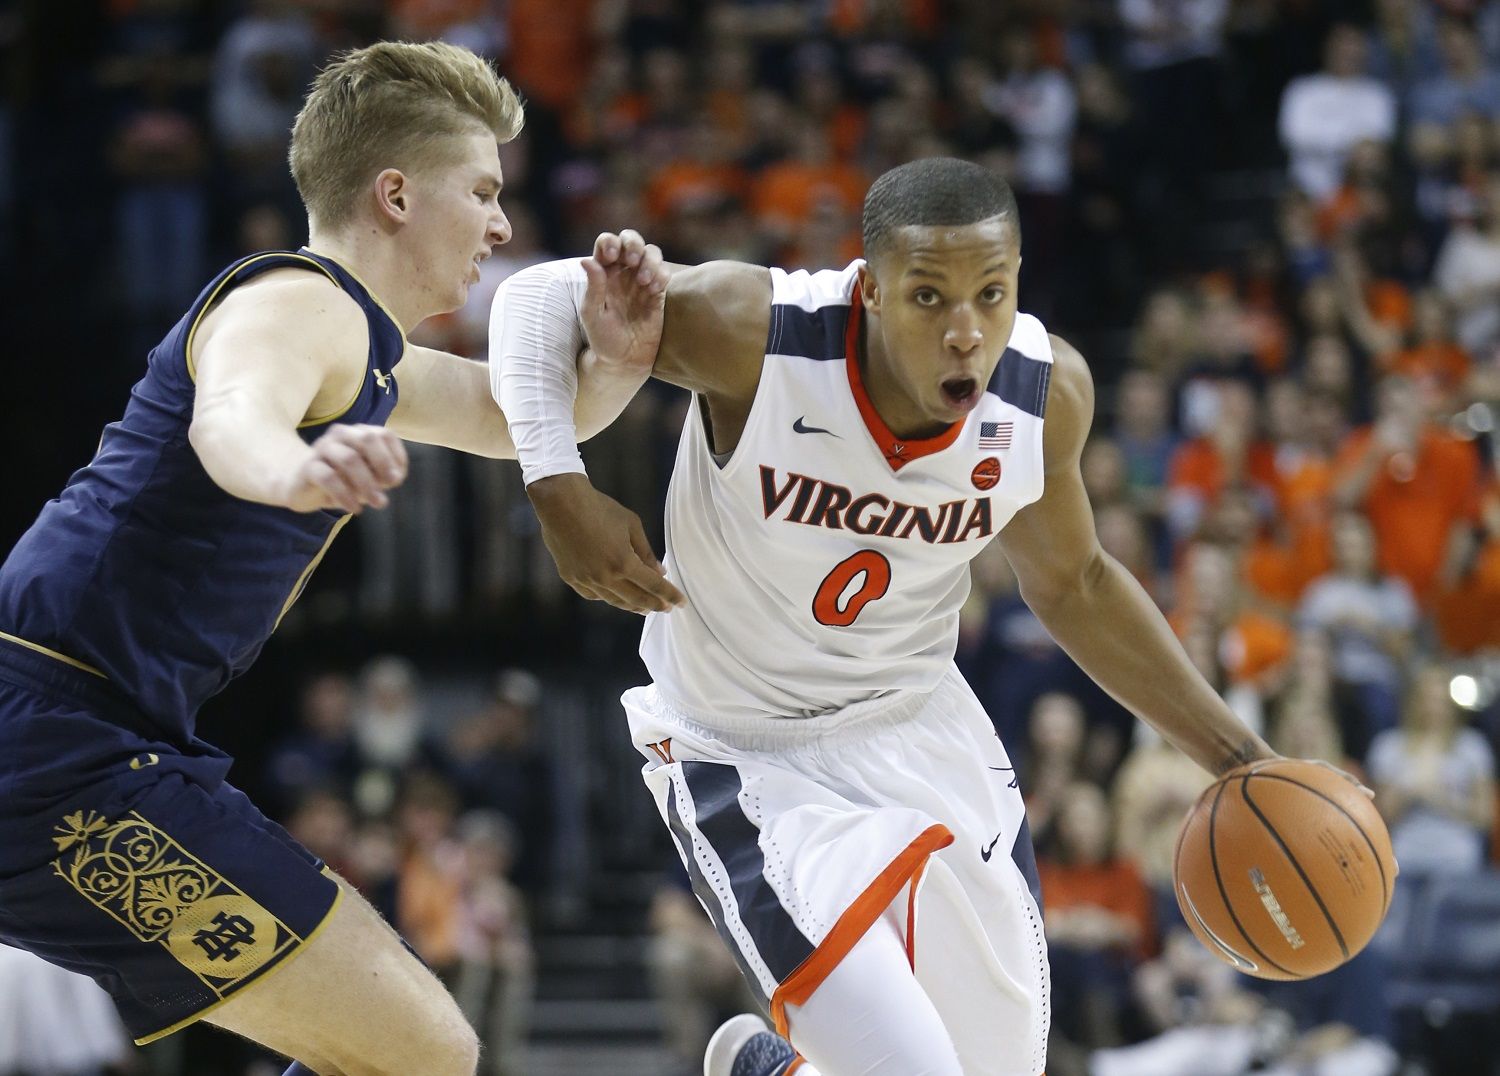 Virginia guard Devon Hall (0) drives past Notre Dame guard Rex Pflueger (0) during the second half of an NCAA college basketball game in Charlottesville, Va., Saturday, March 3, 2018. Virginia won the game 62-57. (AP Photo/Steve Helber)